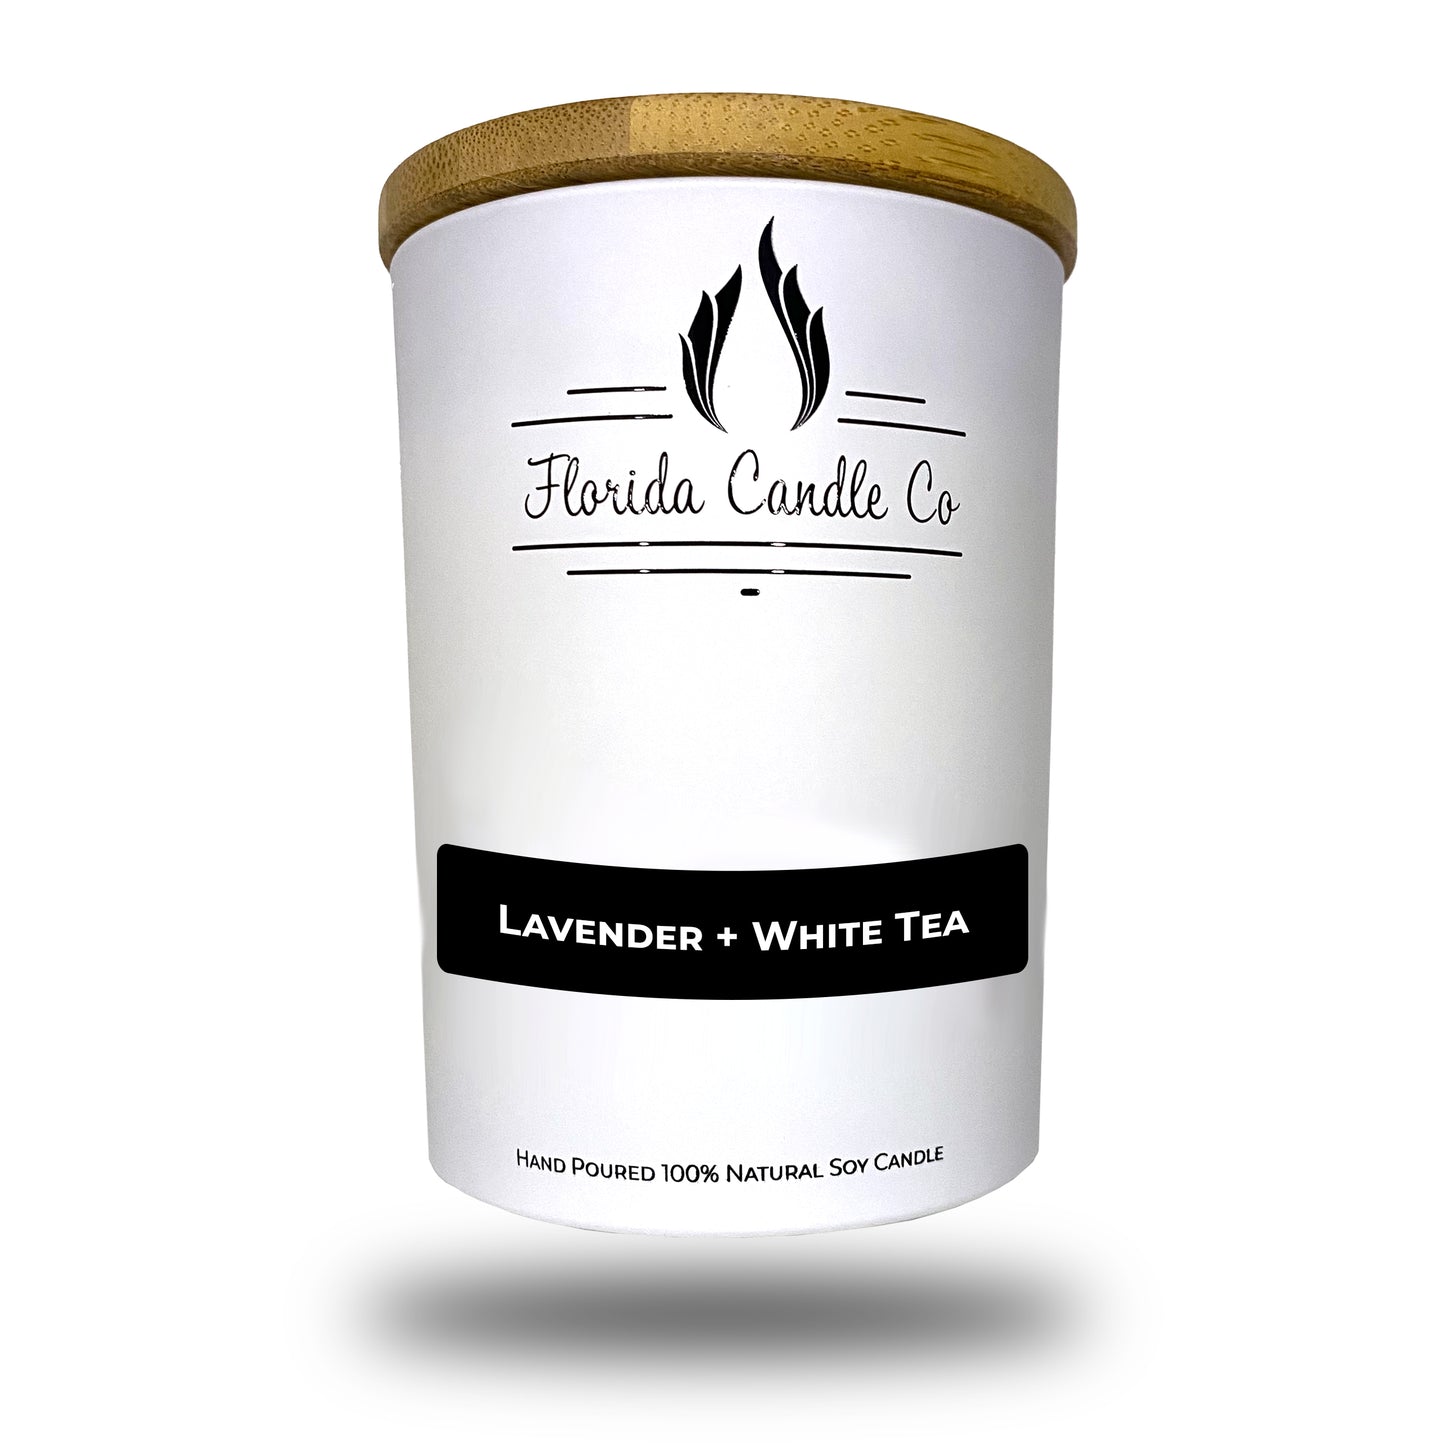 Lavender + White Tea Soy Candle